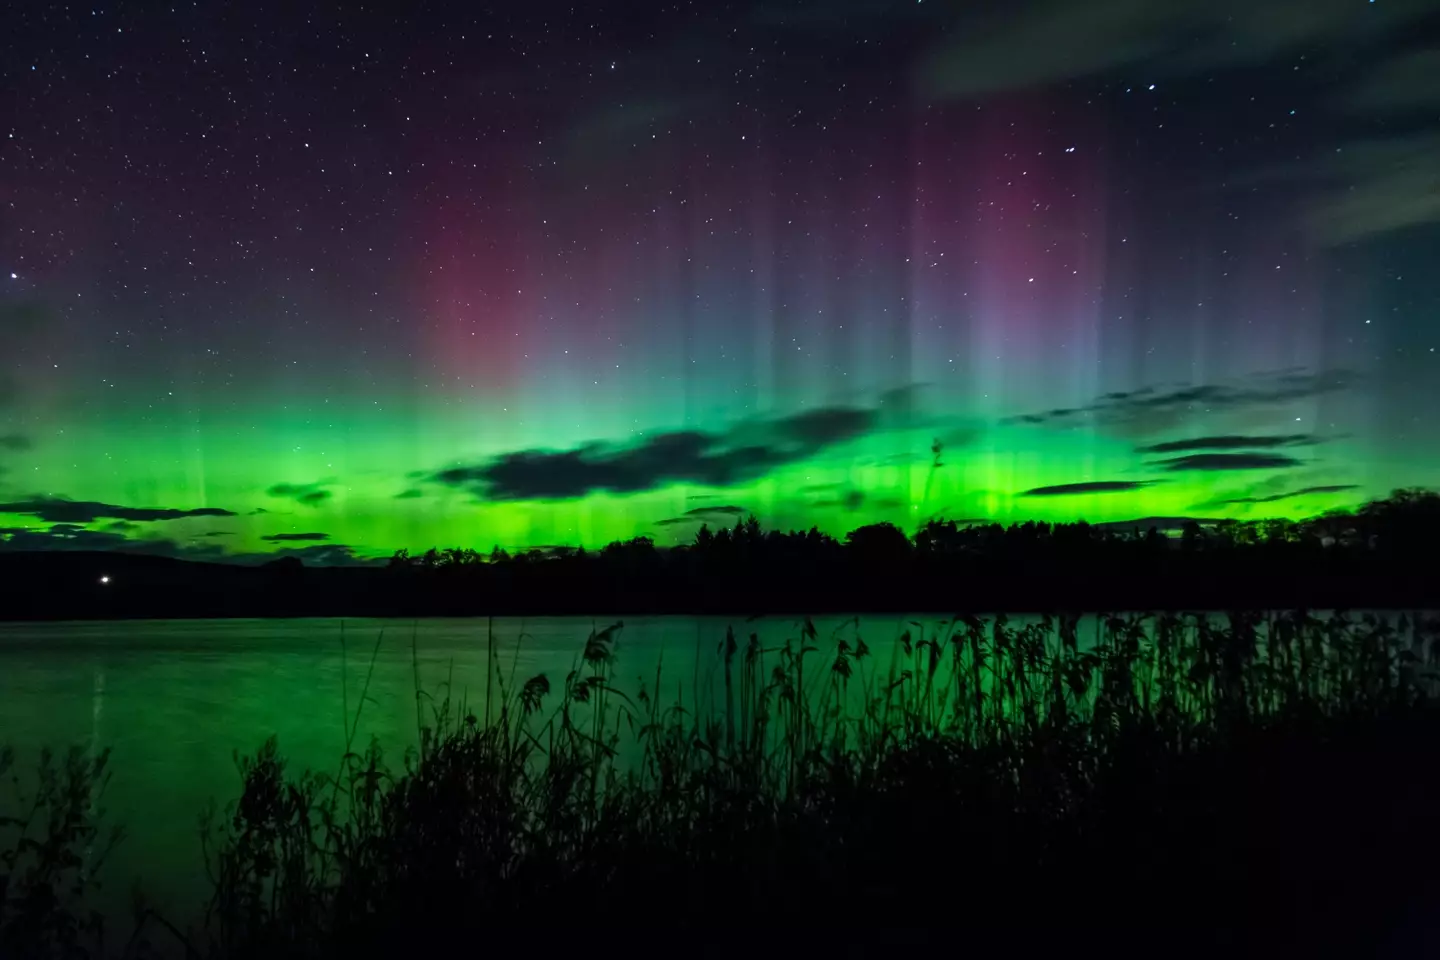 The stunning phenomenon was spotted in various parts of the UK over the weekend.